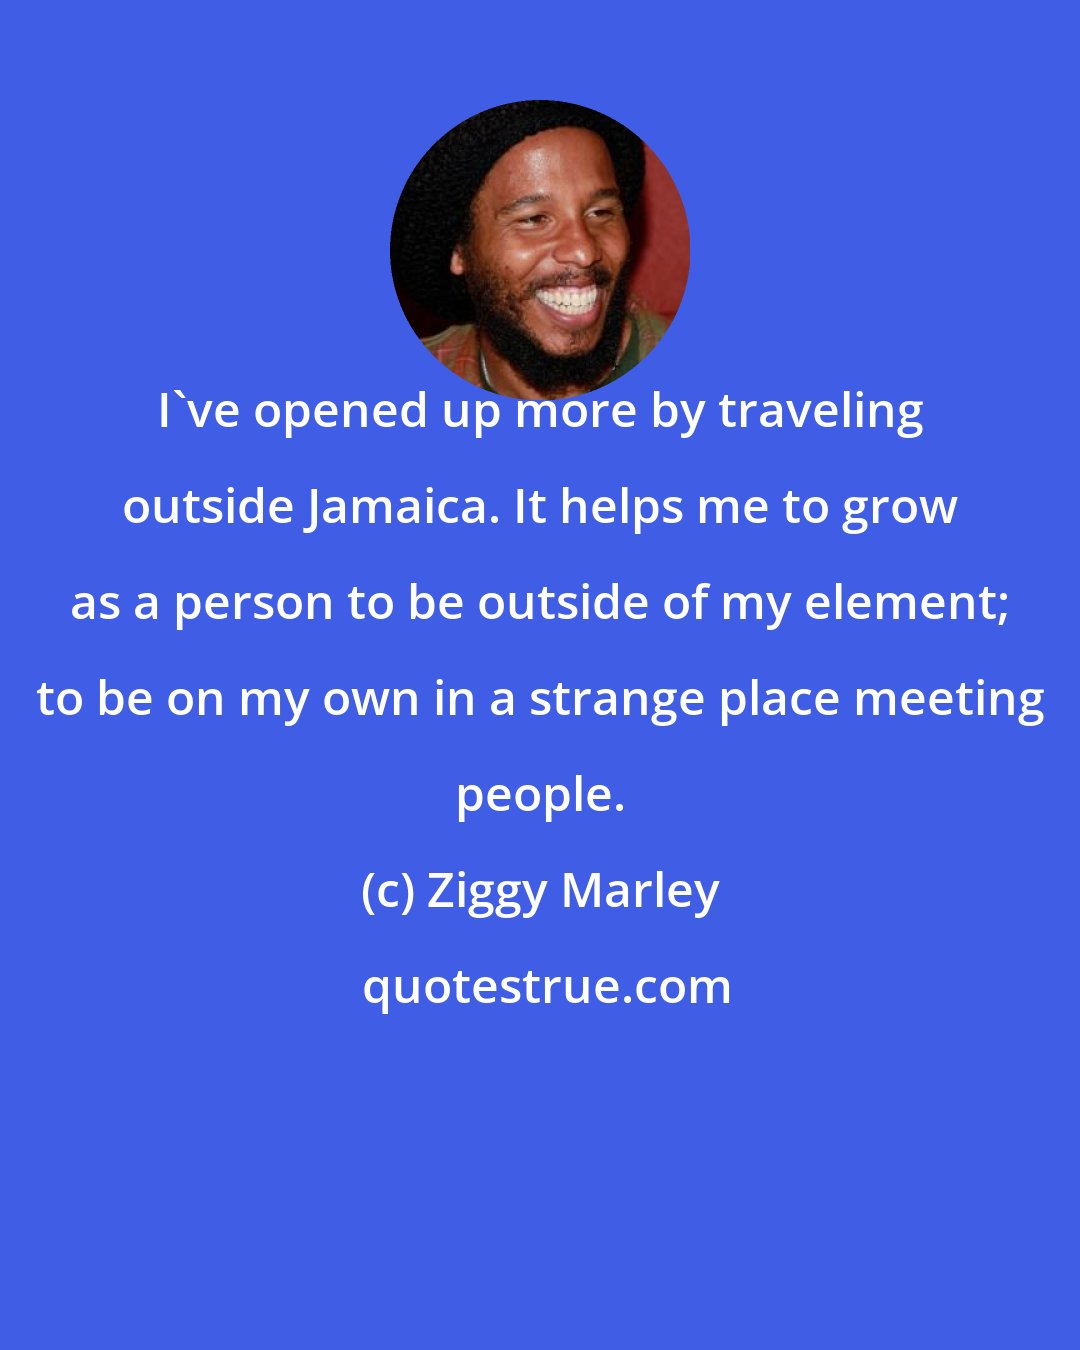 Ziggy Marley: I've opened up more by traveling outside Jamaica. It helps me to grow as a person to be outside of my element; to be on my own in a strange place meeting people.